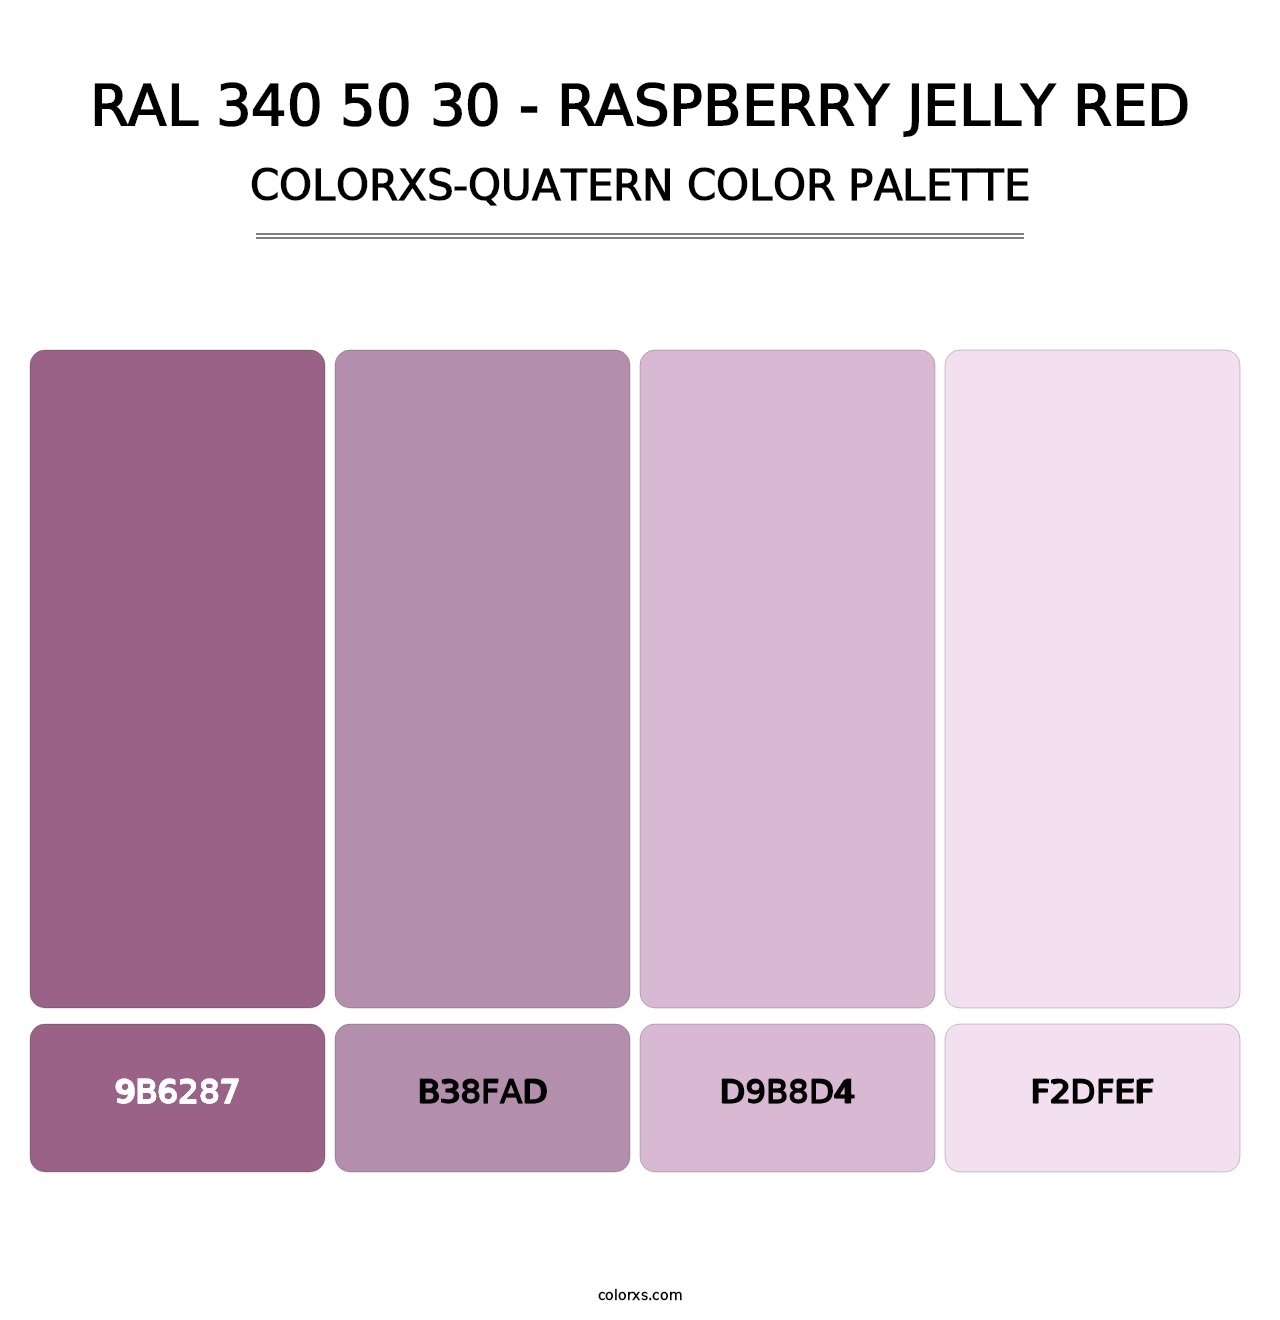 RAL 340 50 30 - Raspberry Jelly Red - Colorxs Quatern Palette